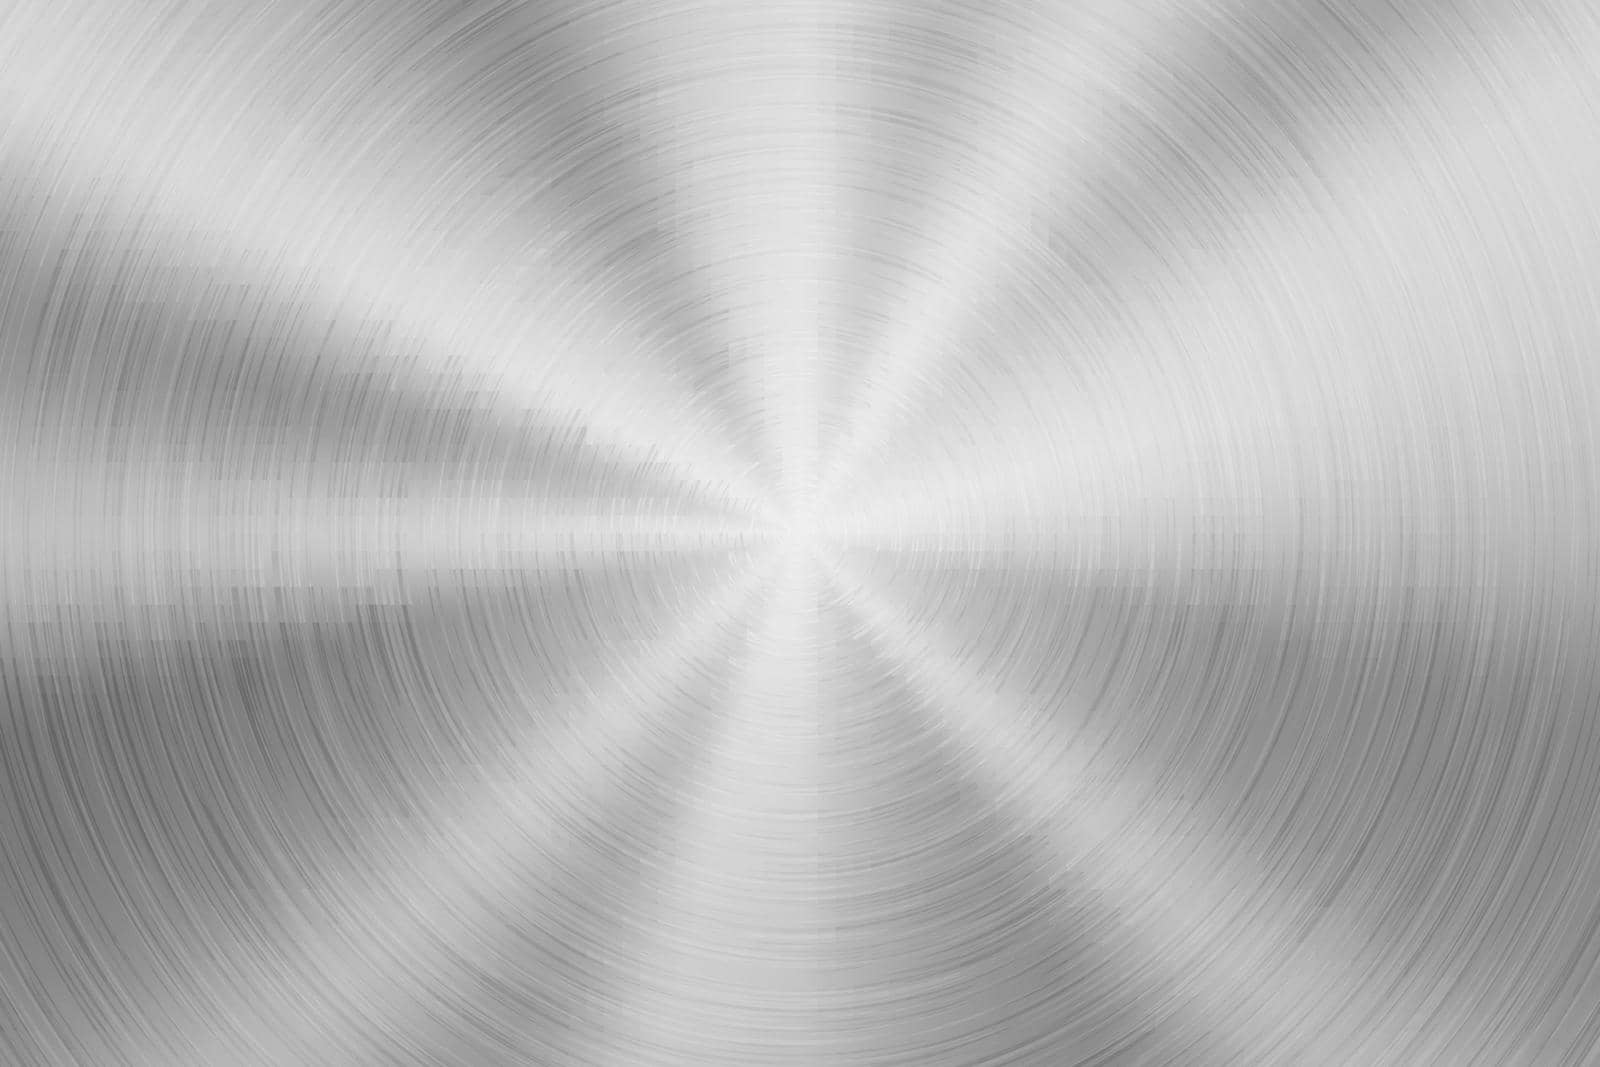 Metal abstract technology background with circular polished, brushed concentric texture, chrome, silver, steel, aluminum for design concepts, wallpapers, web and prints. Vector illustration.